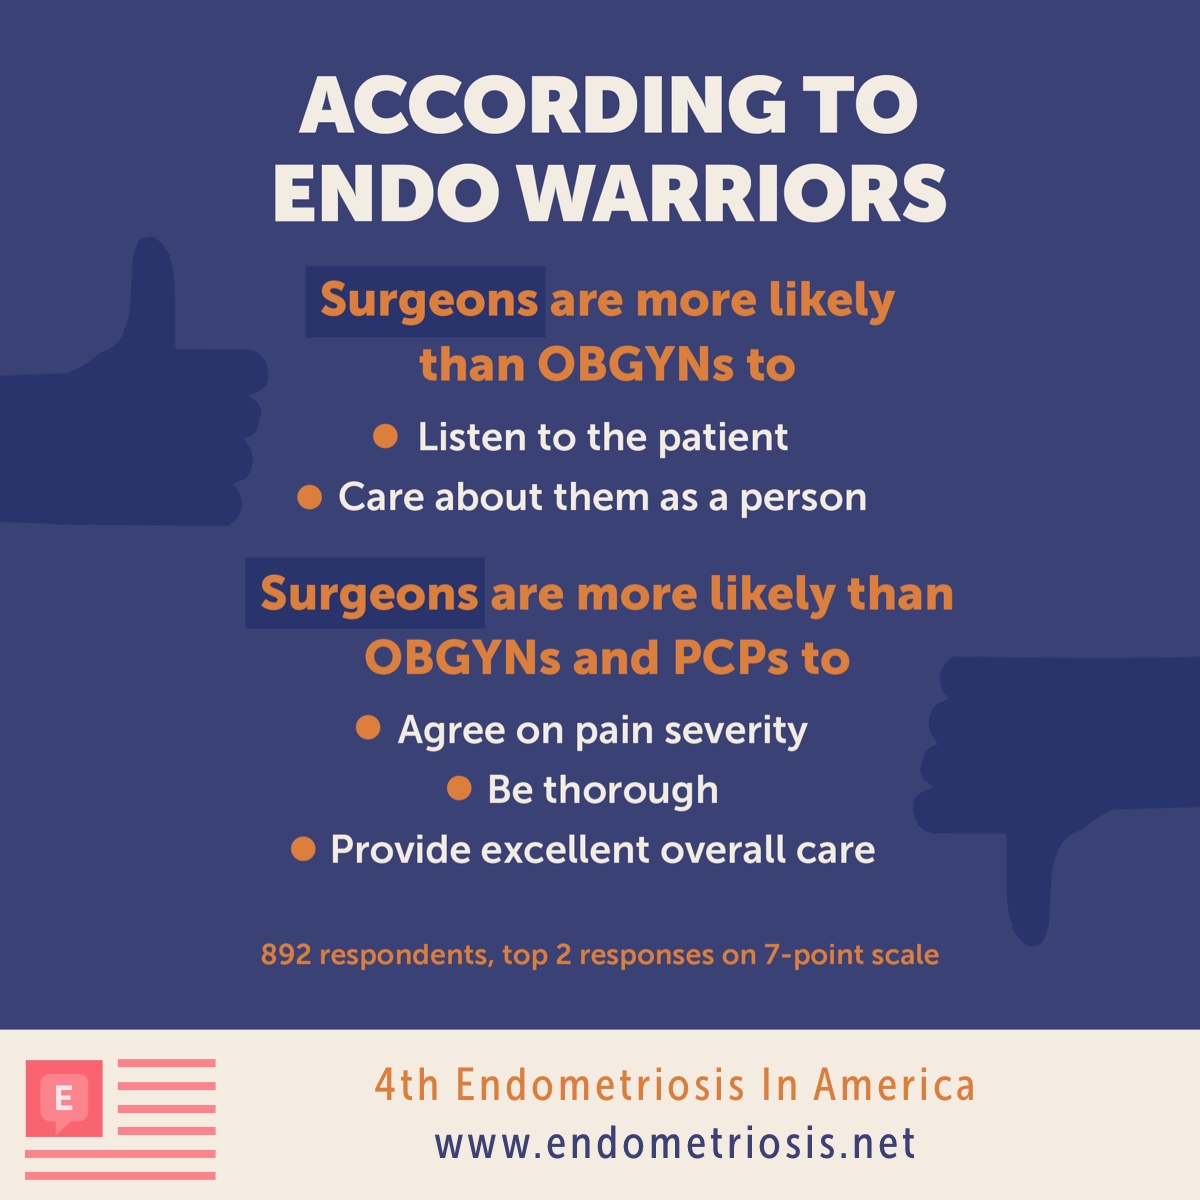 According to endo warriors, surgeons are more likely than OBGYNs to listen to the patient and care about them as a person.